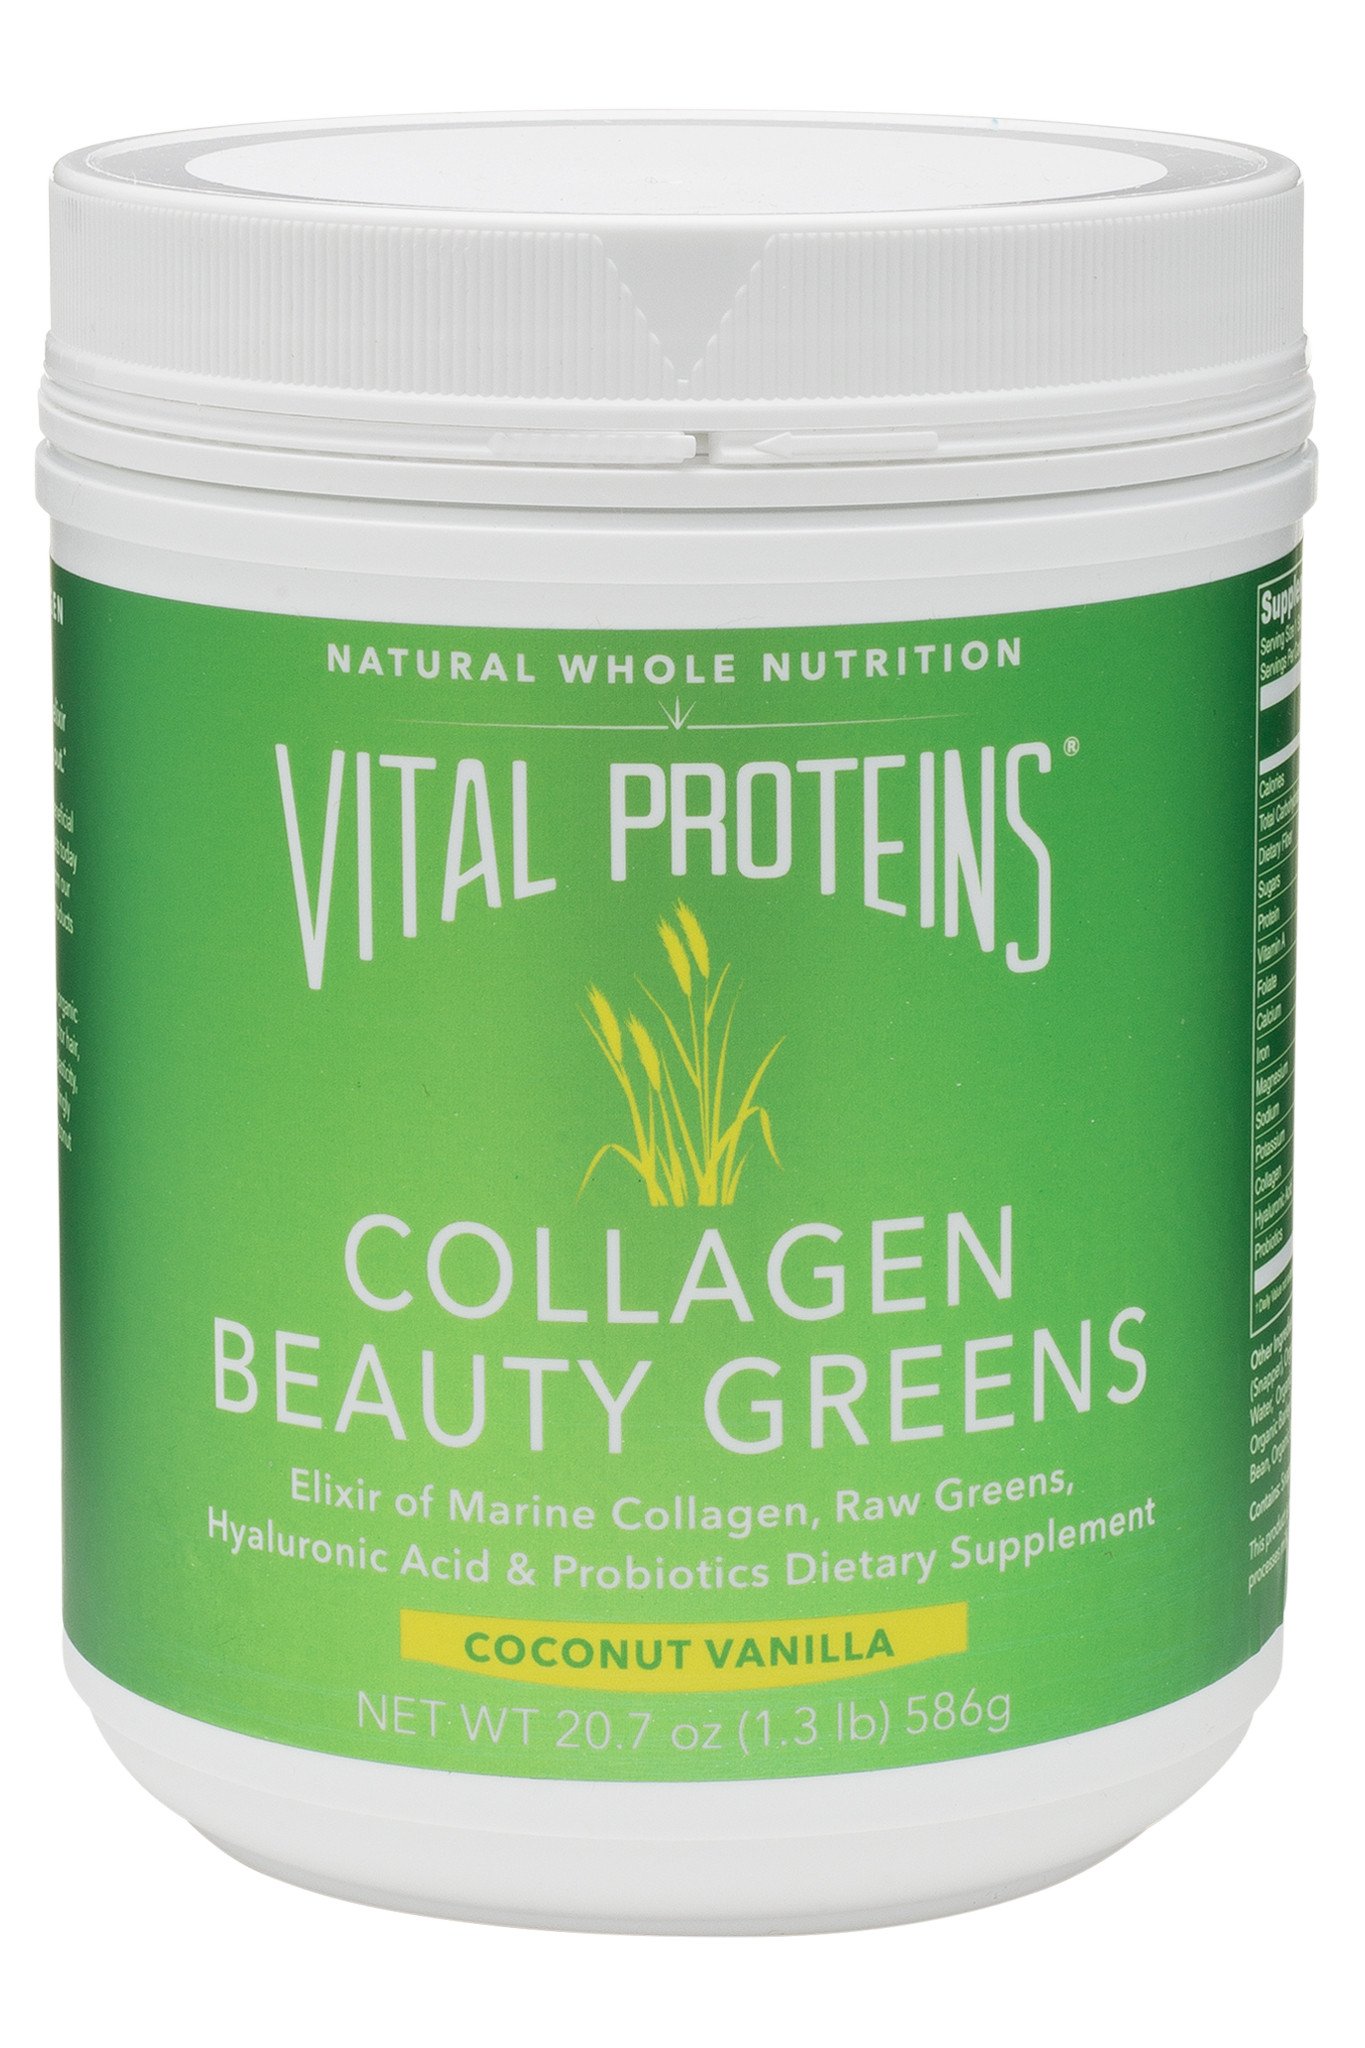 Collagen Beauty Greens - Vital Proteins